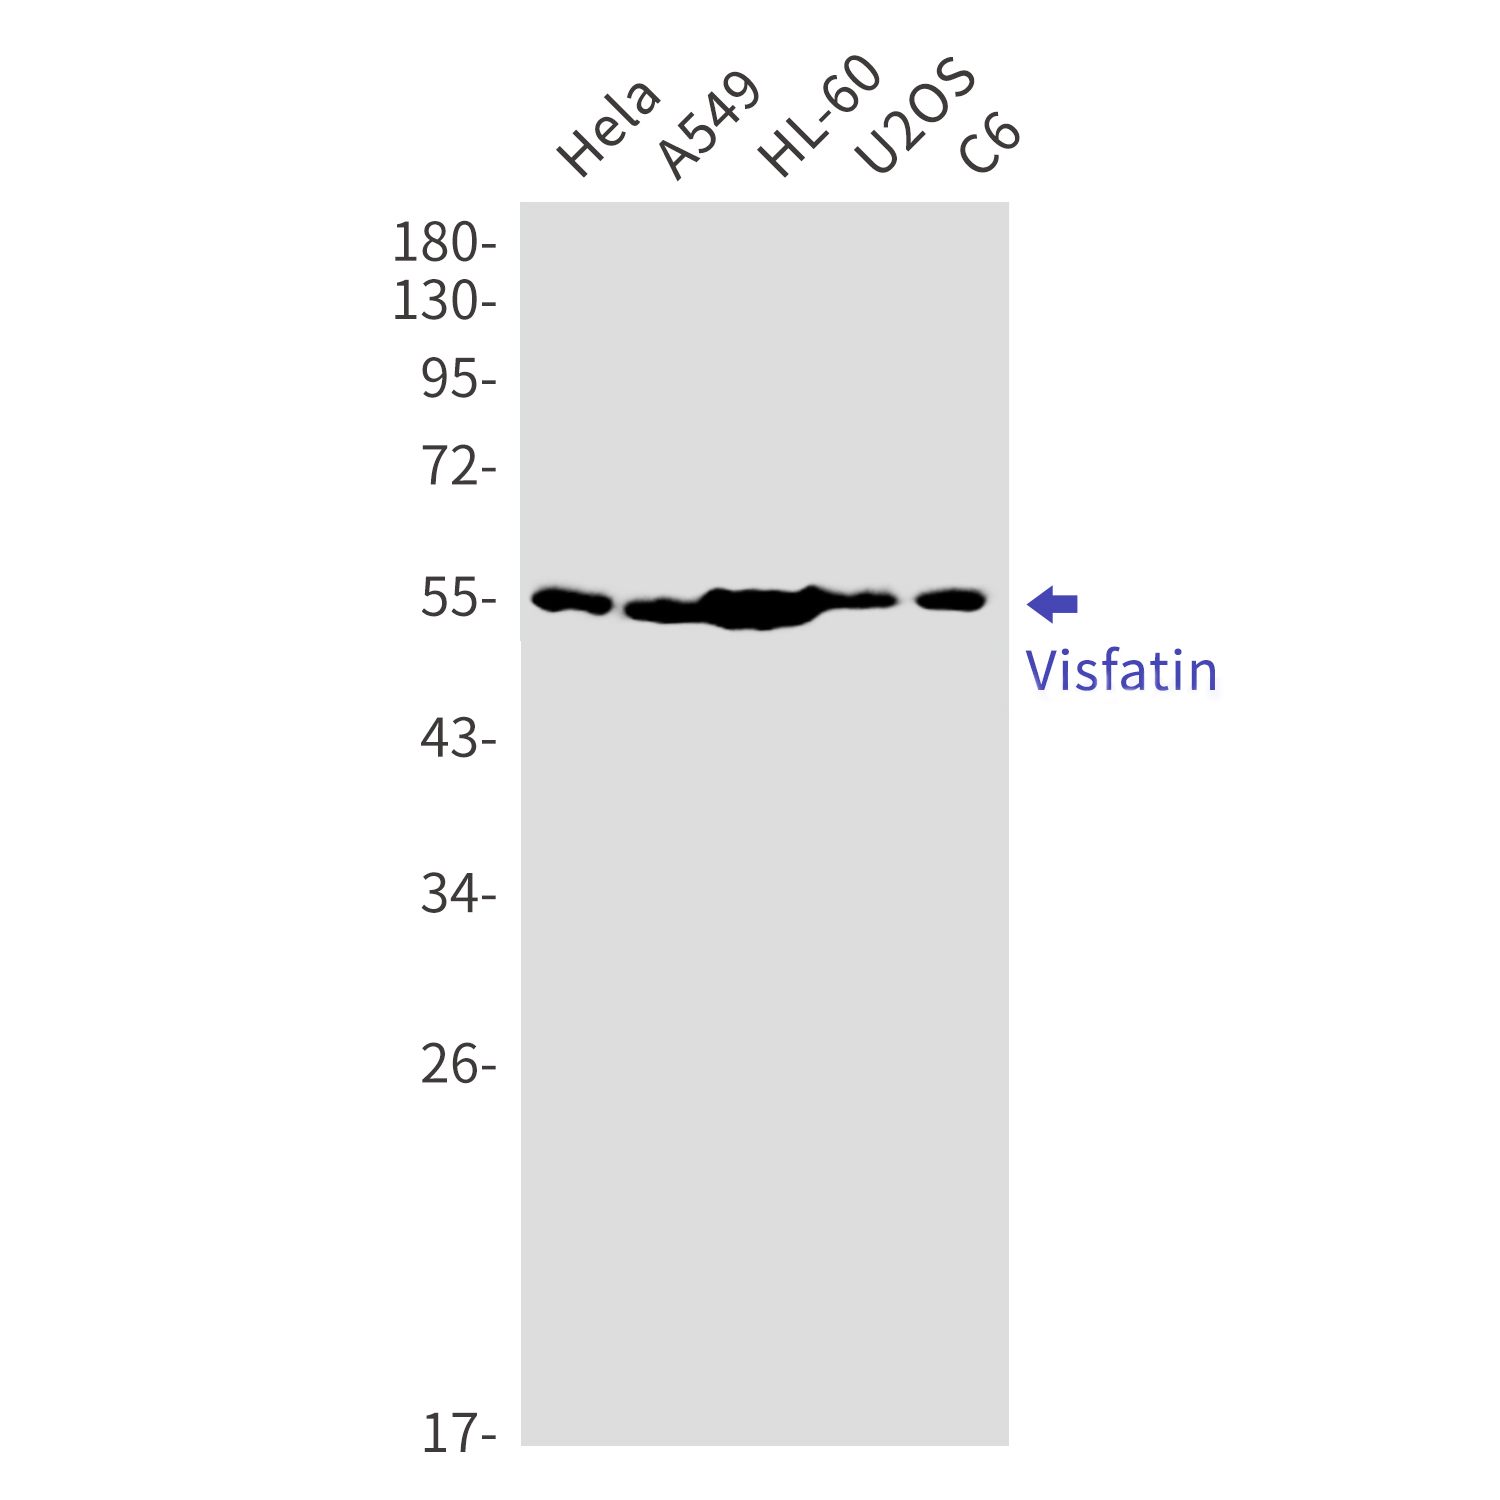 Western blot detection of Visfatin in Hela,A549,HL-60,U2OS,C6 cell lysates using Visfatin Rabbit mAb(1:1000 diluted).Predicted band size:56kDa.Observed band size:56kDa.